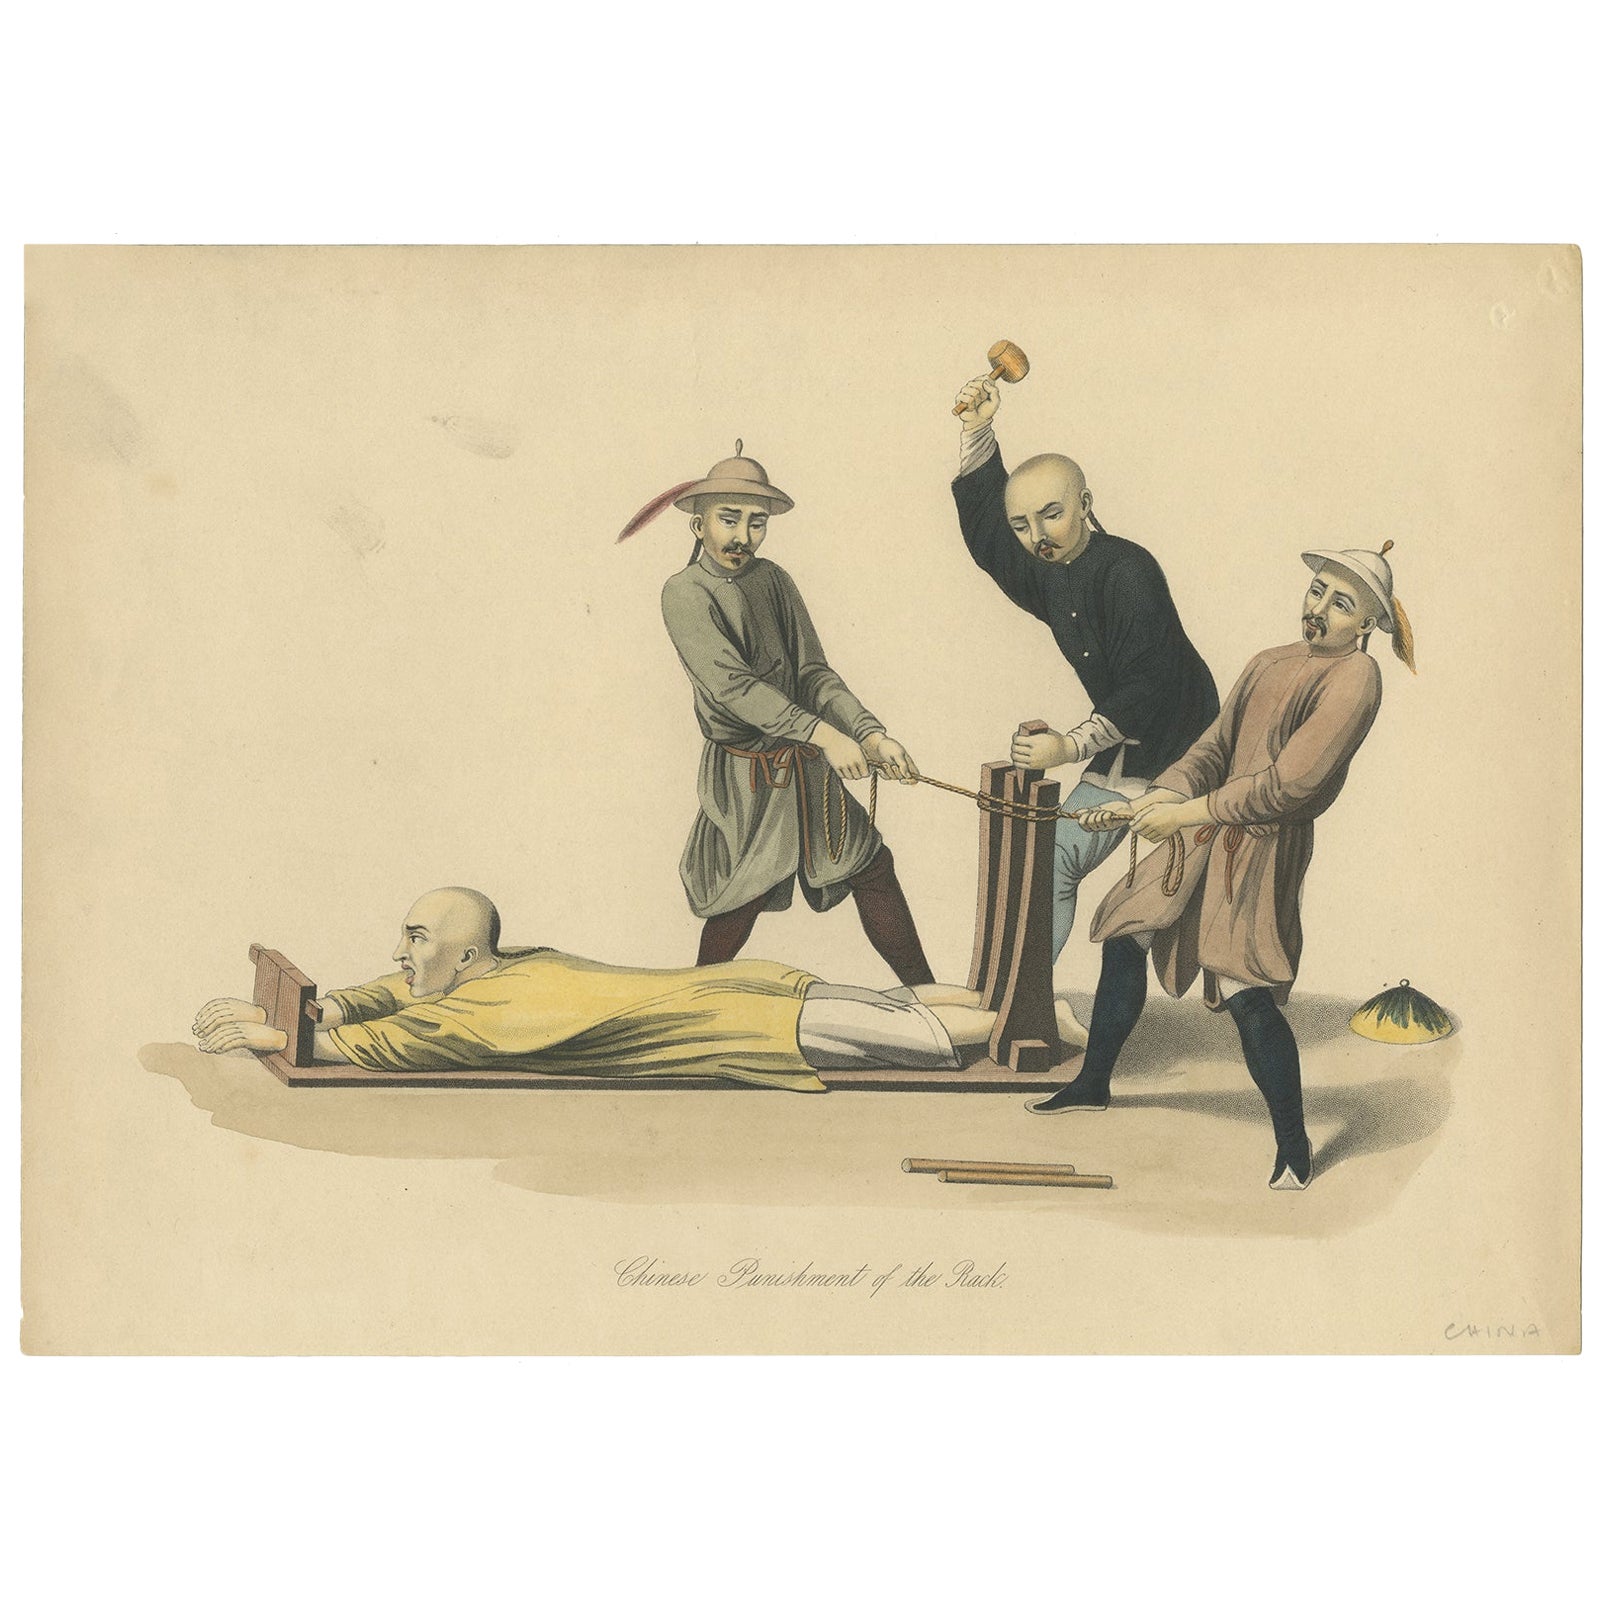 Antique Print of Chinese Torture or Punishment of the Rack, 1859